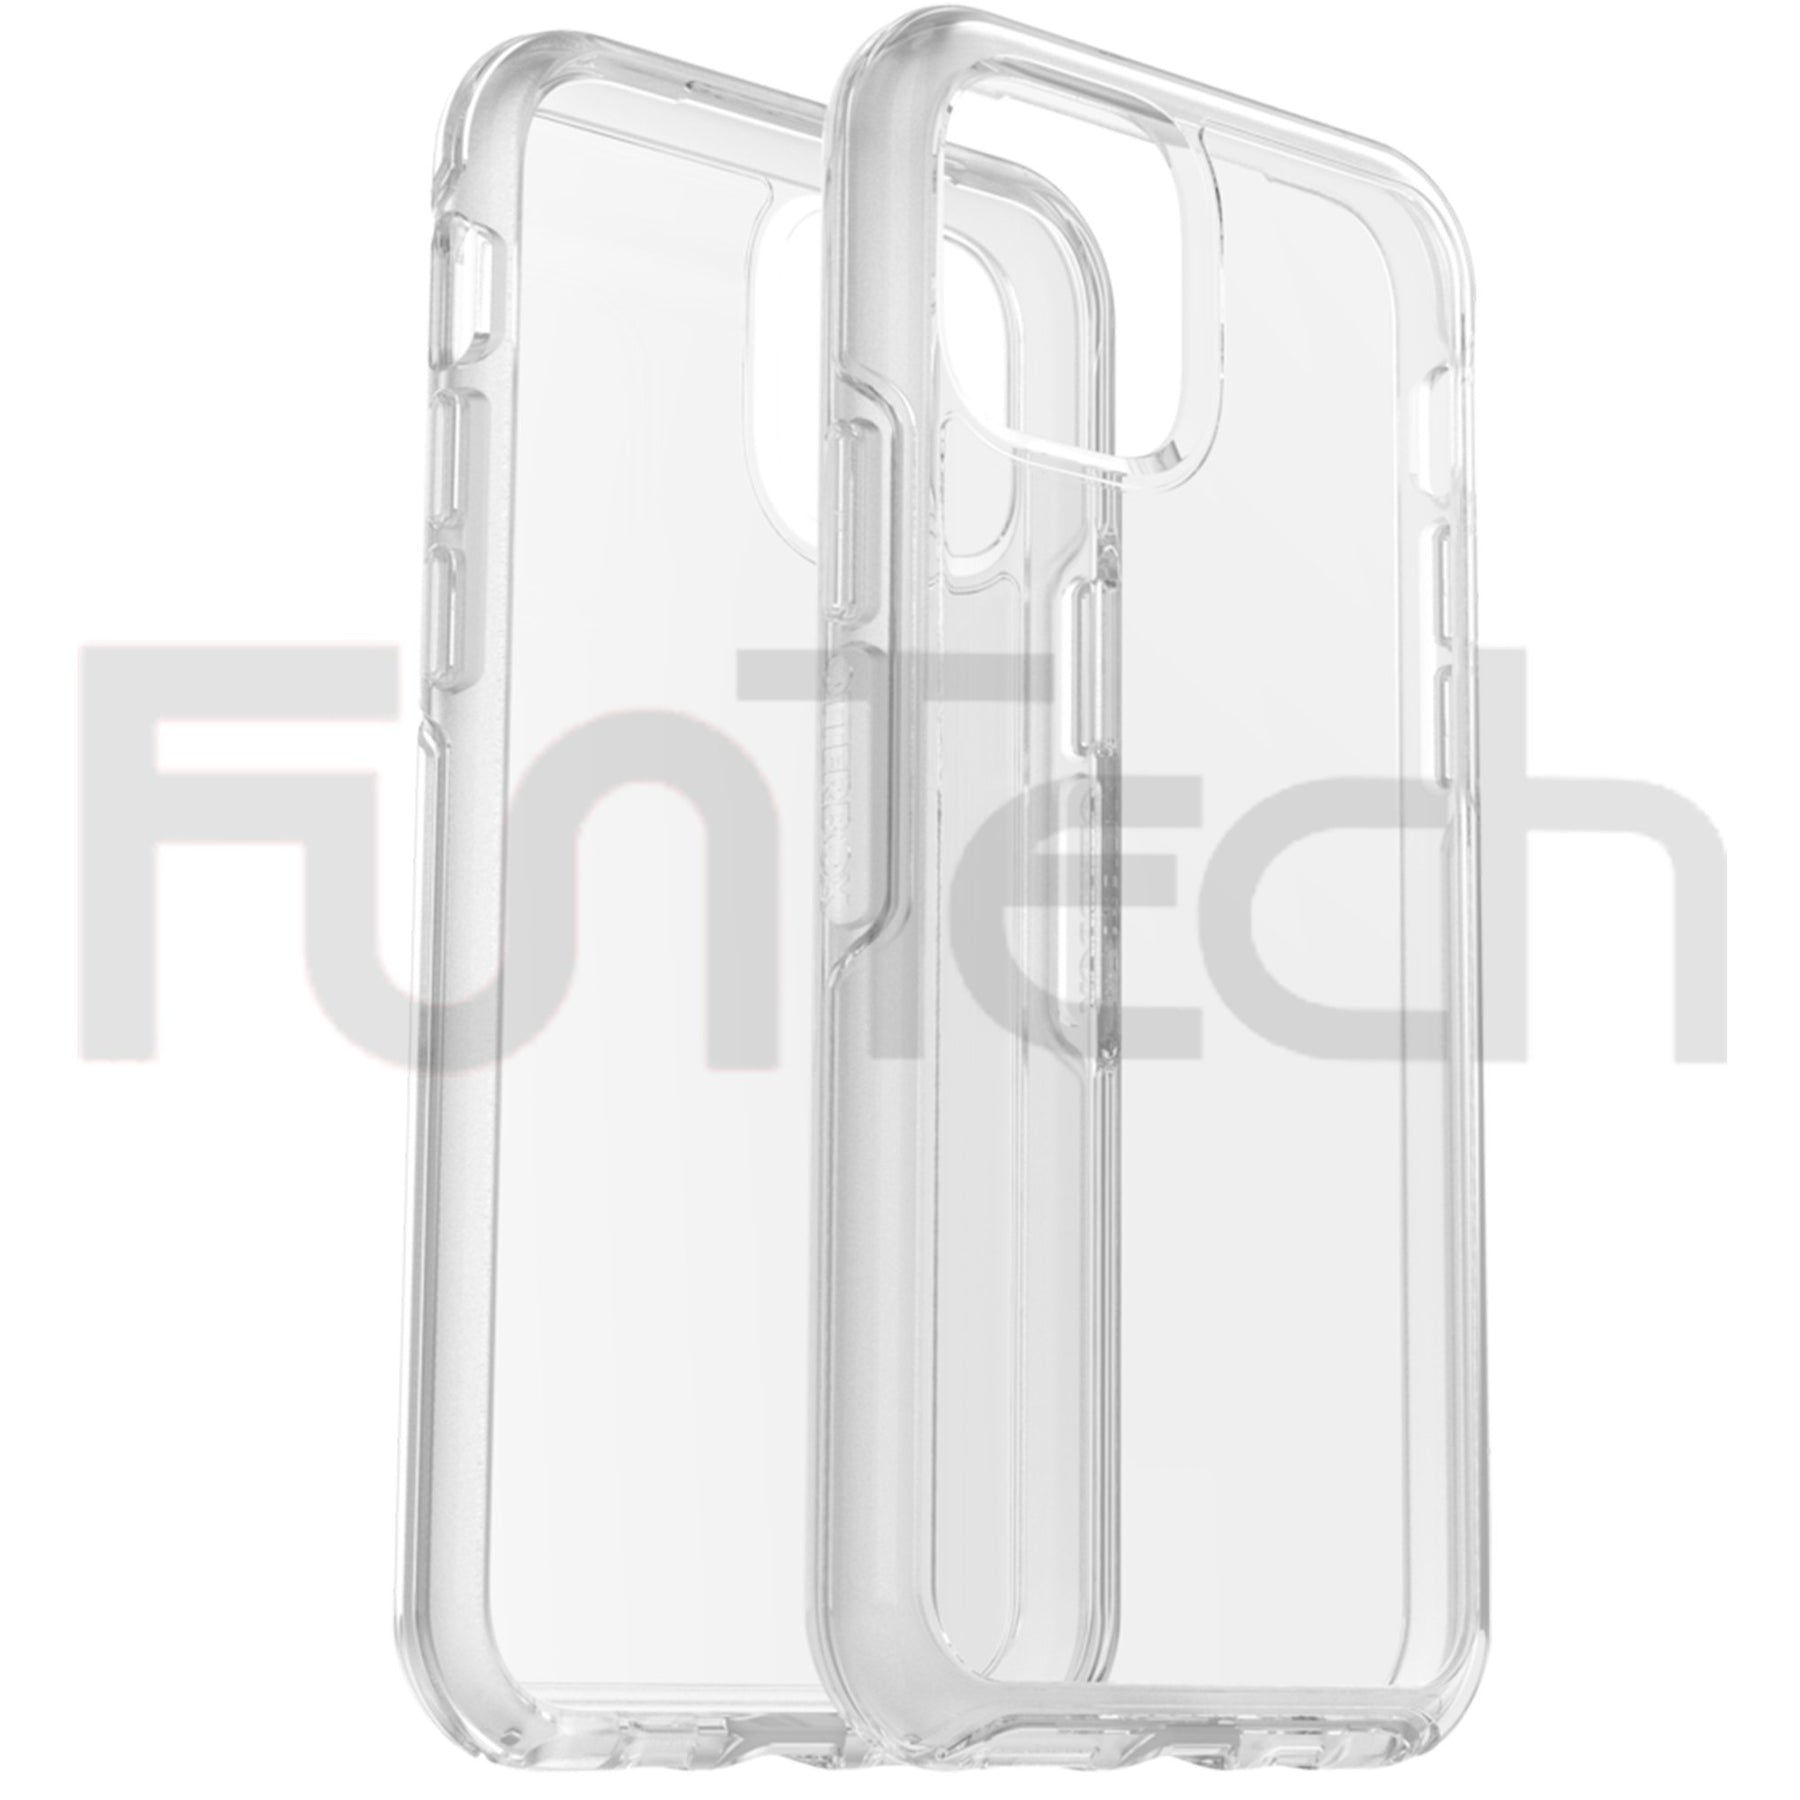 Apple iPhone 11 Pro MAX Creative Case Color Clear 